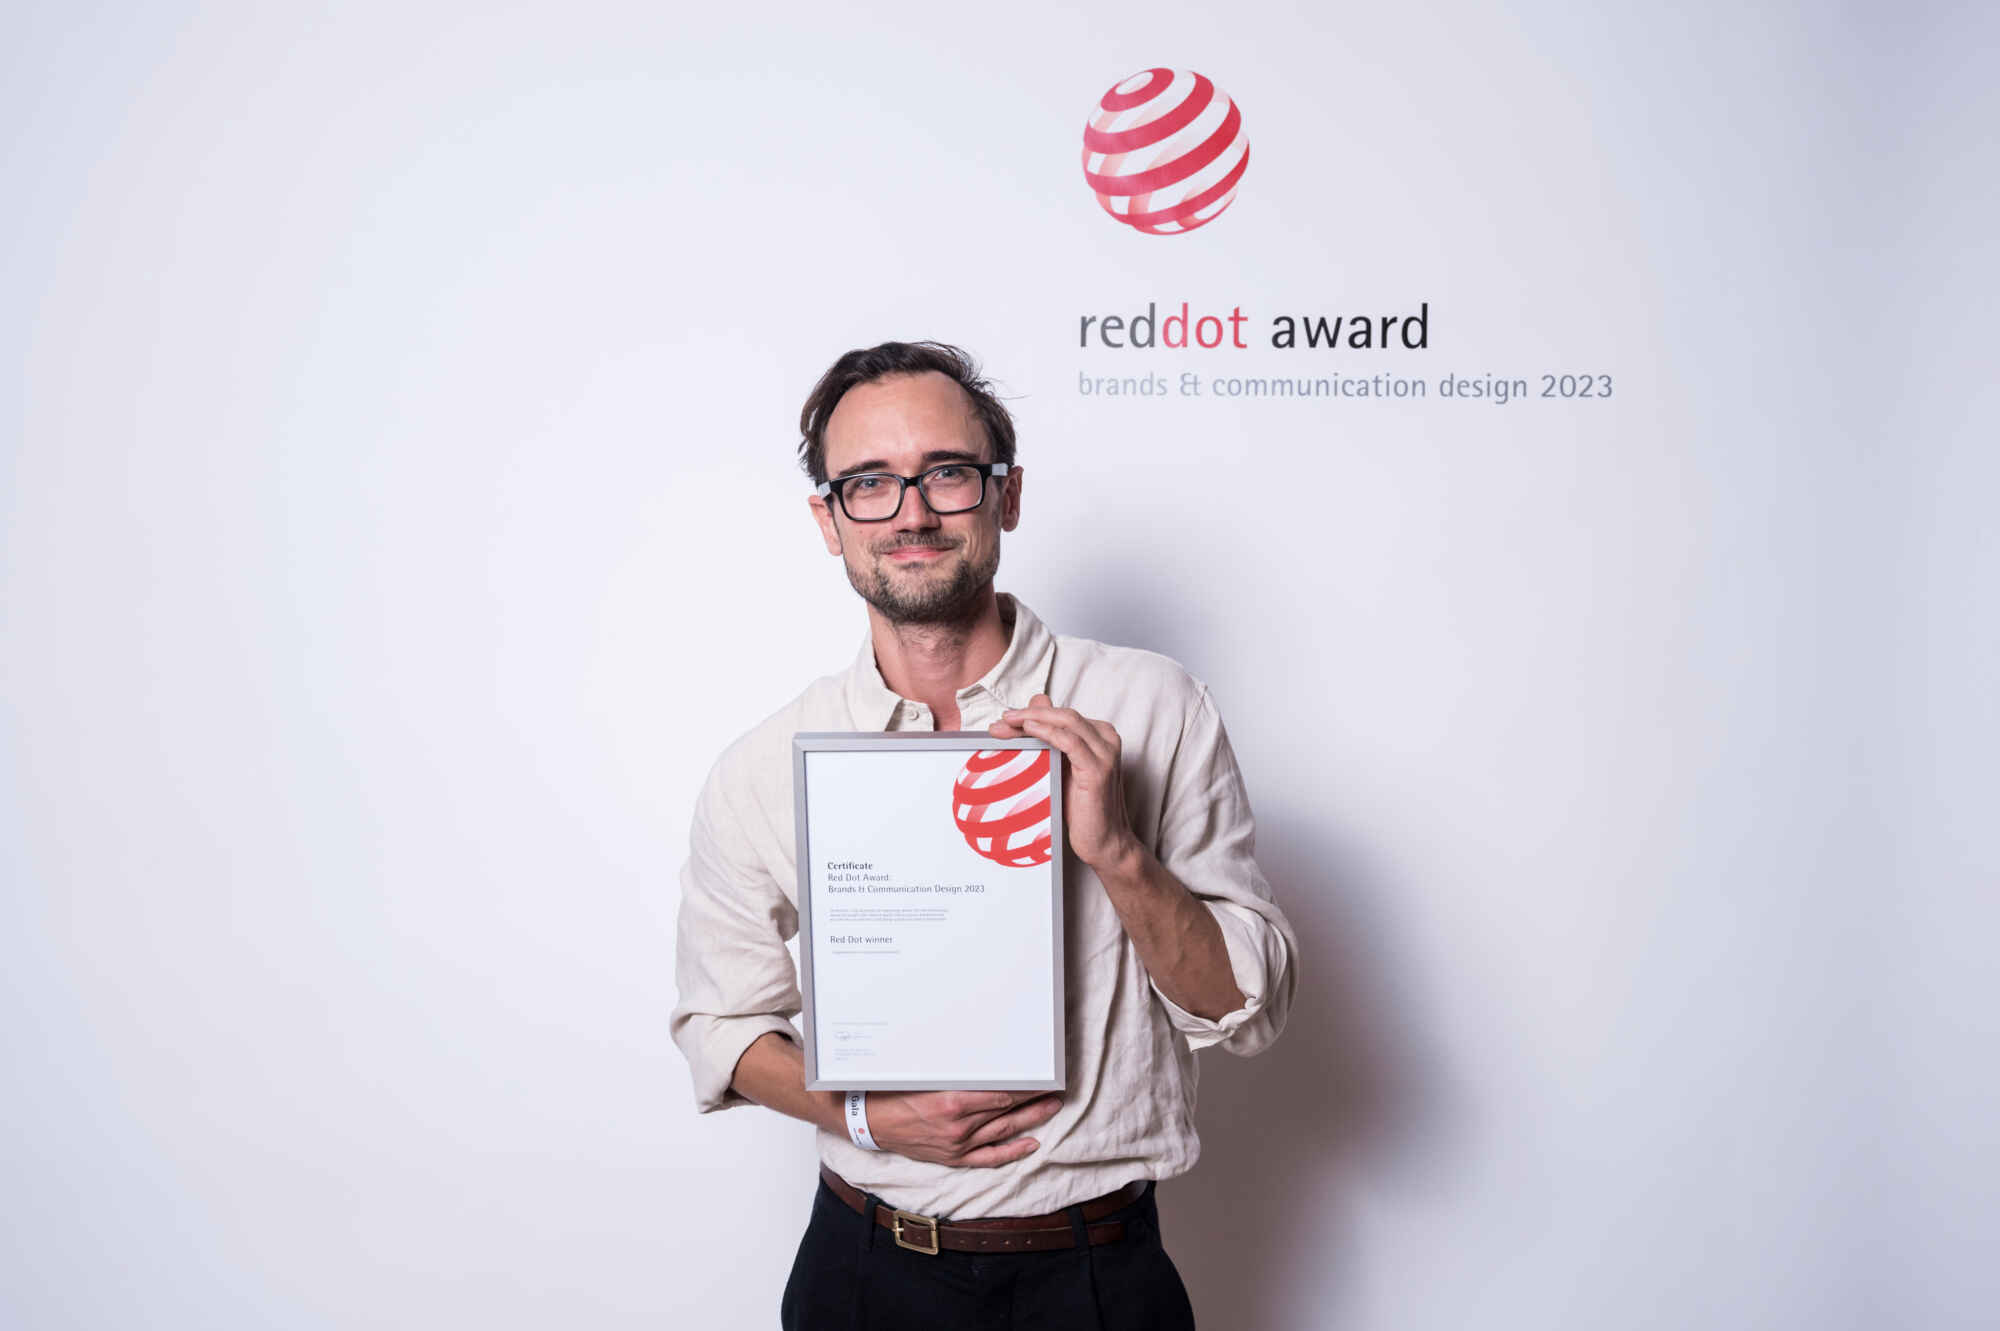 This image shows the logo of the Red Dot Design Award 2023, which Identity Lab won.